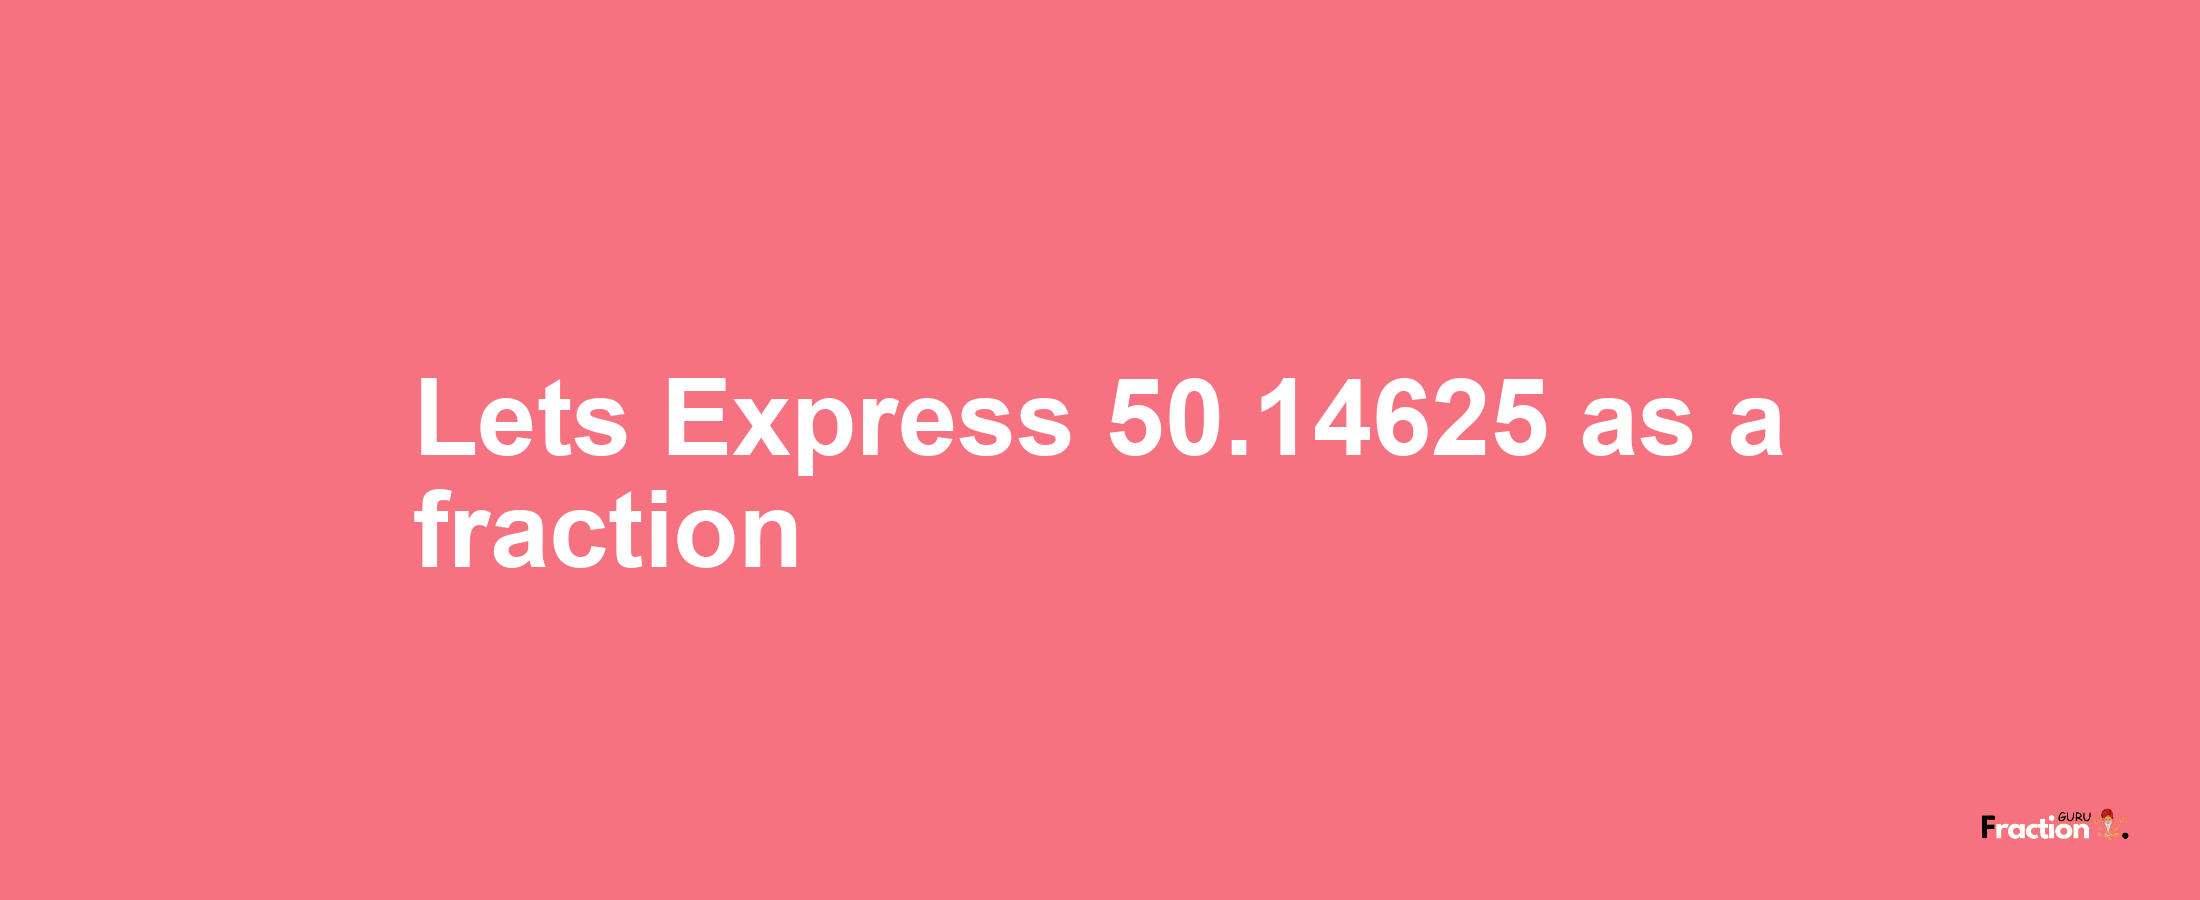 Lets Express 50.14625 as afraction